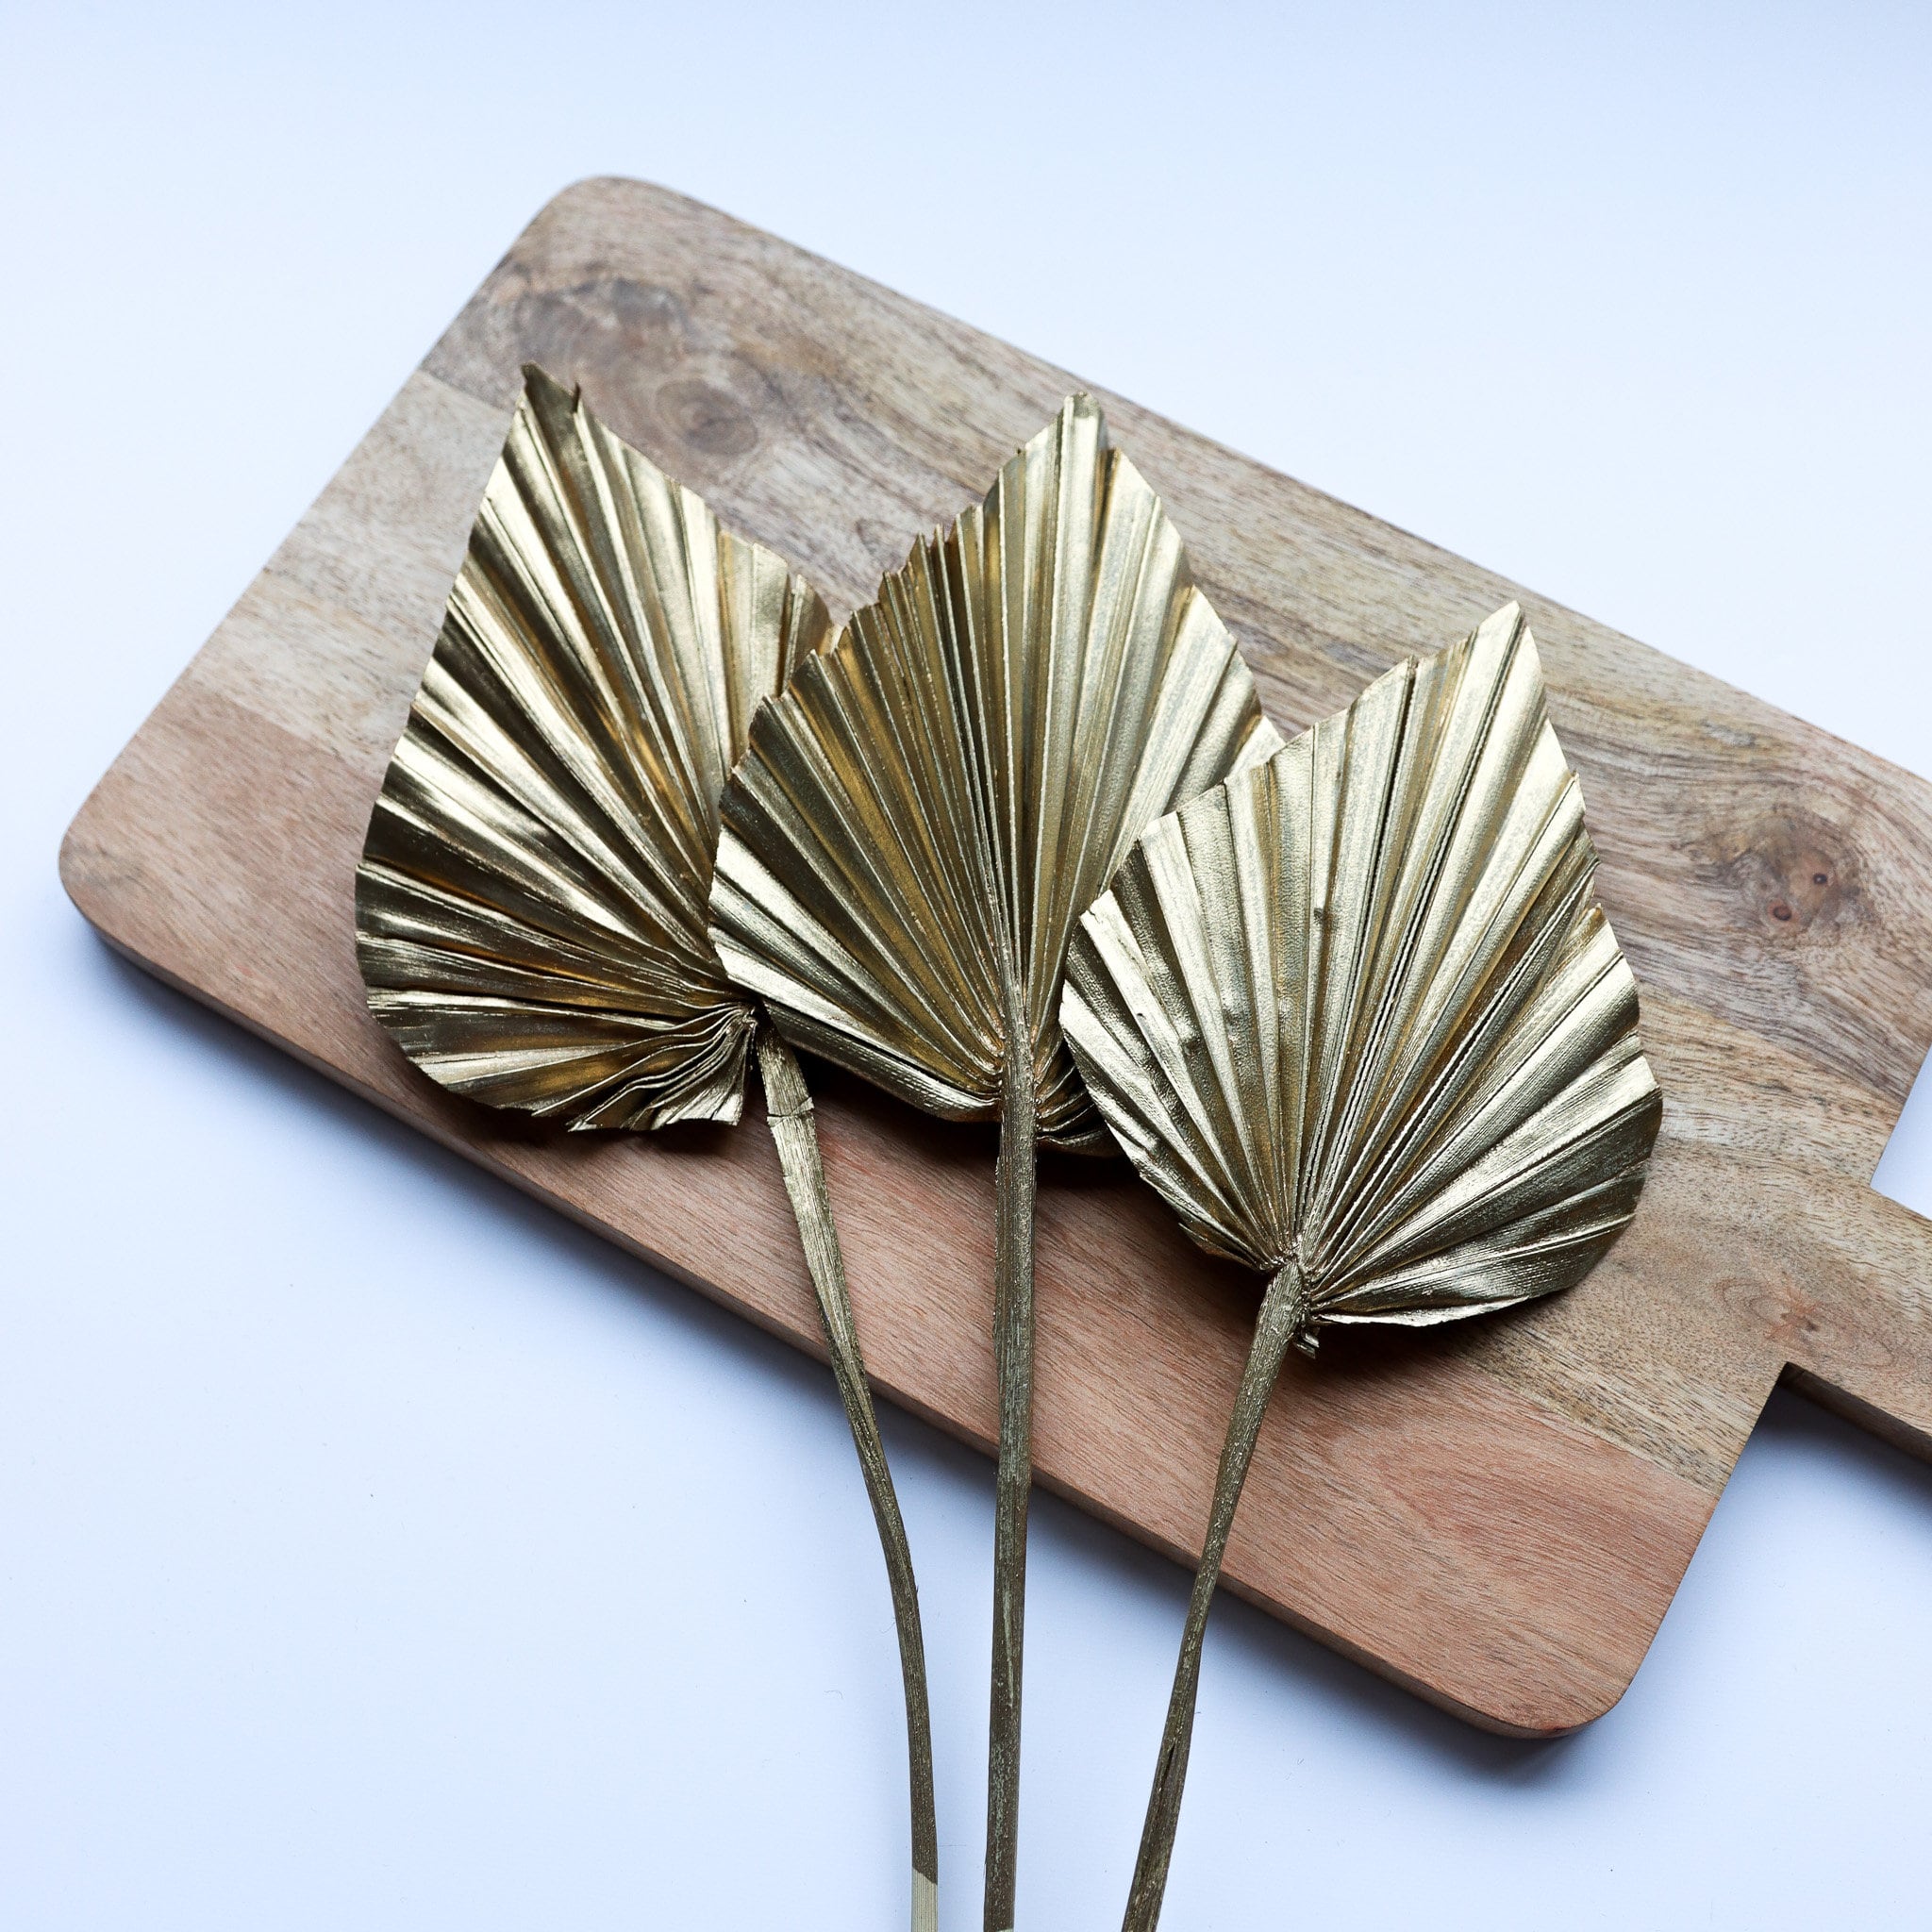  4-pack of gold cake decorations gold palm spears for cakes leaf  cake decorations palm leaf cake topper gold palm leaf cake topper birthday  cake decorations DIY craft projects wedding baby birthday 